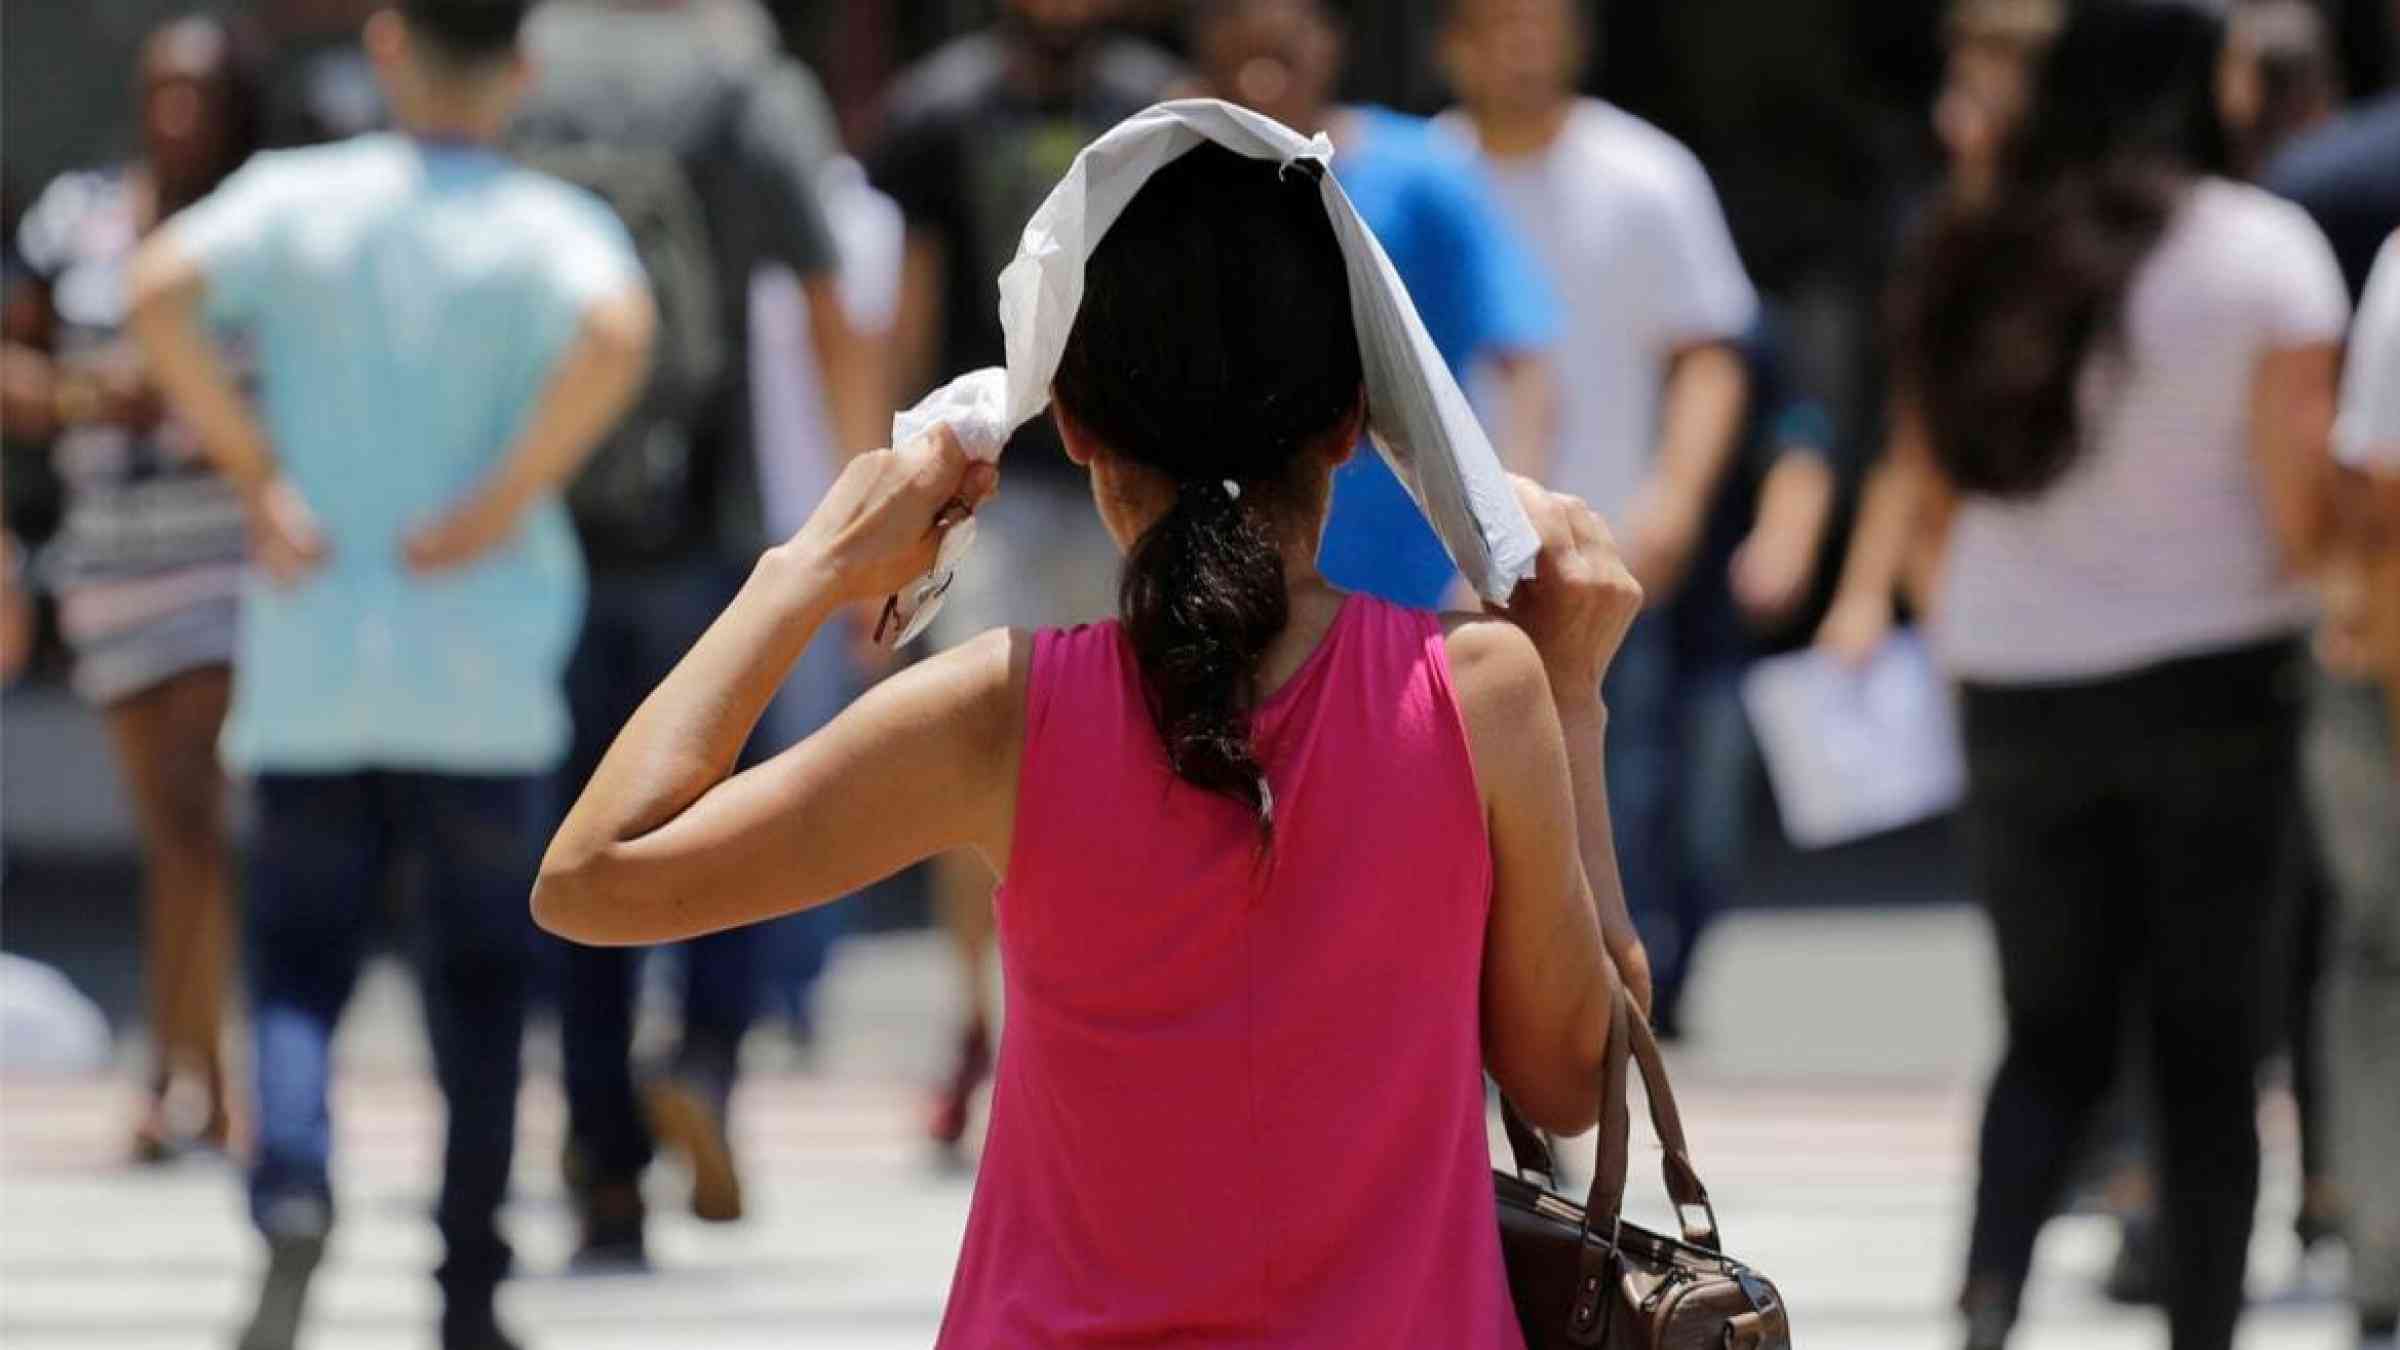 A woman protects herself from the hot sun in Sao Paulo, Brazil.